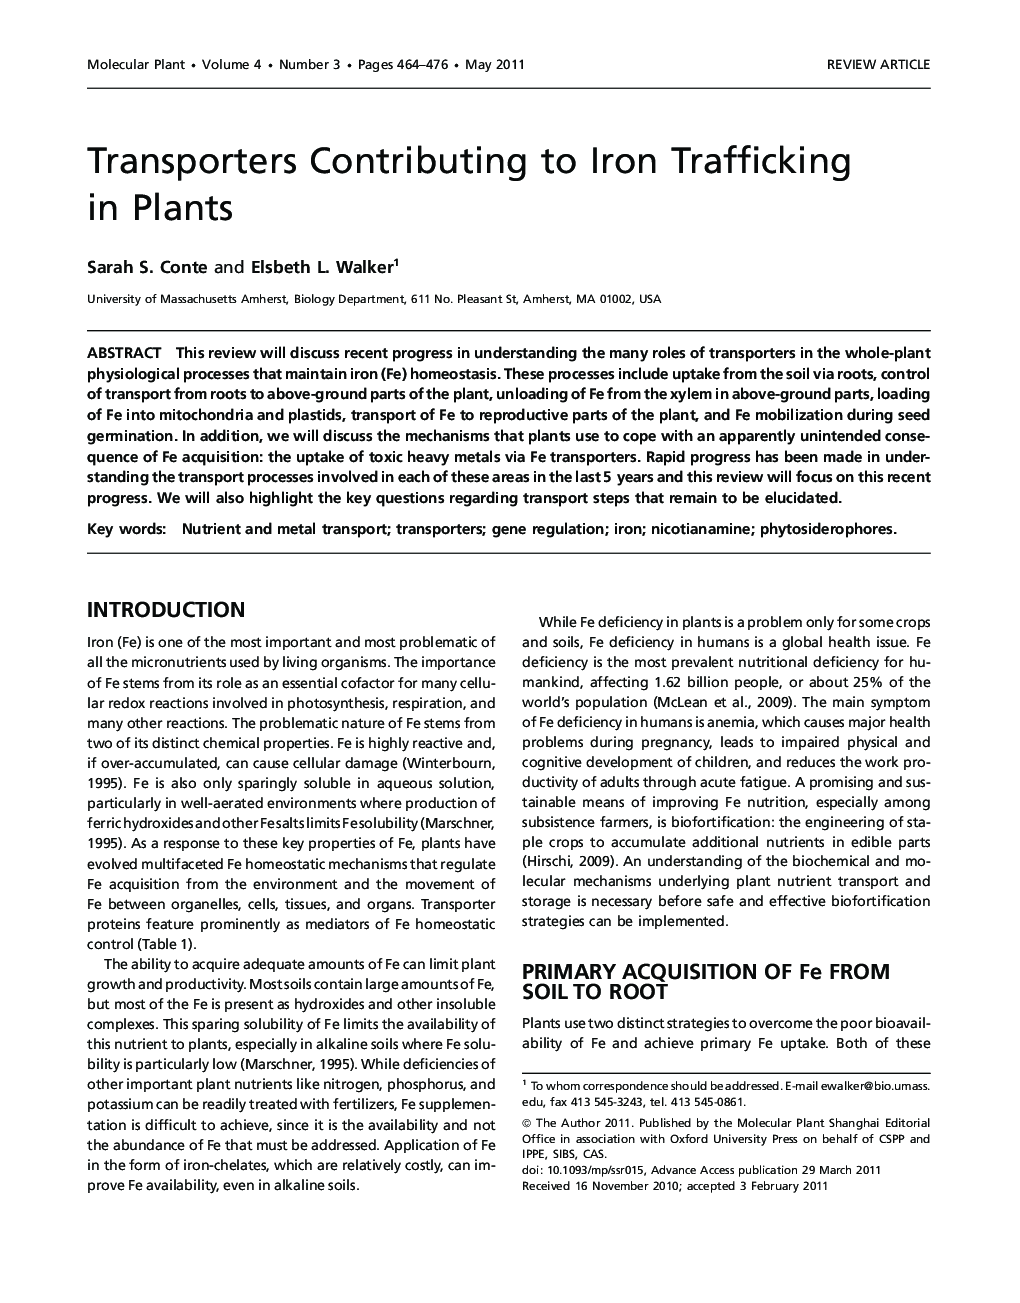 Transporters Contributing to Iron Trafficking in Plants 